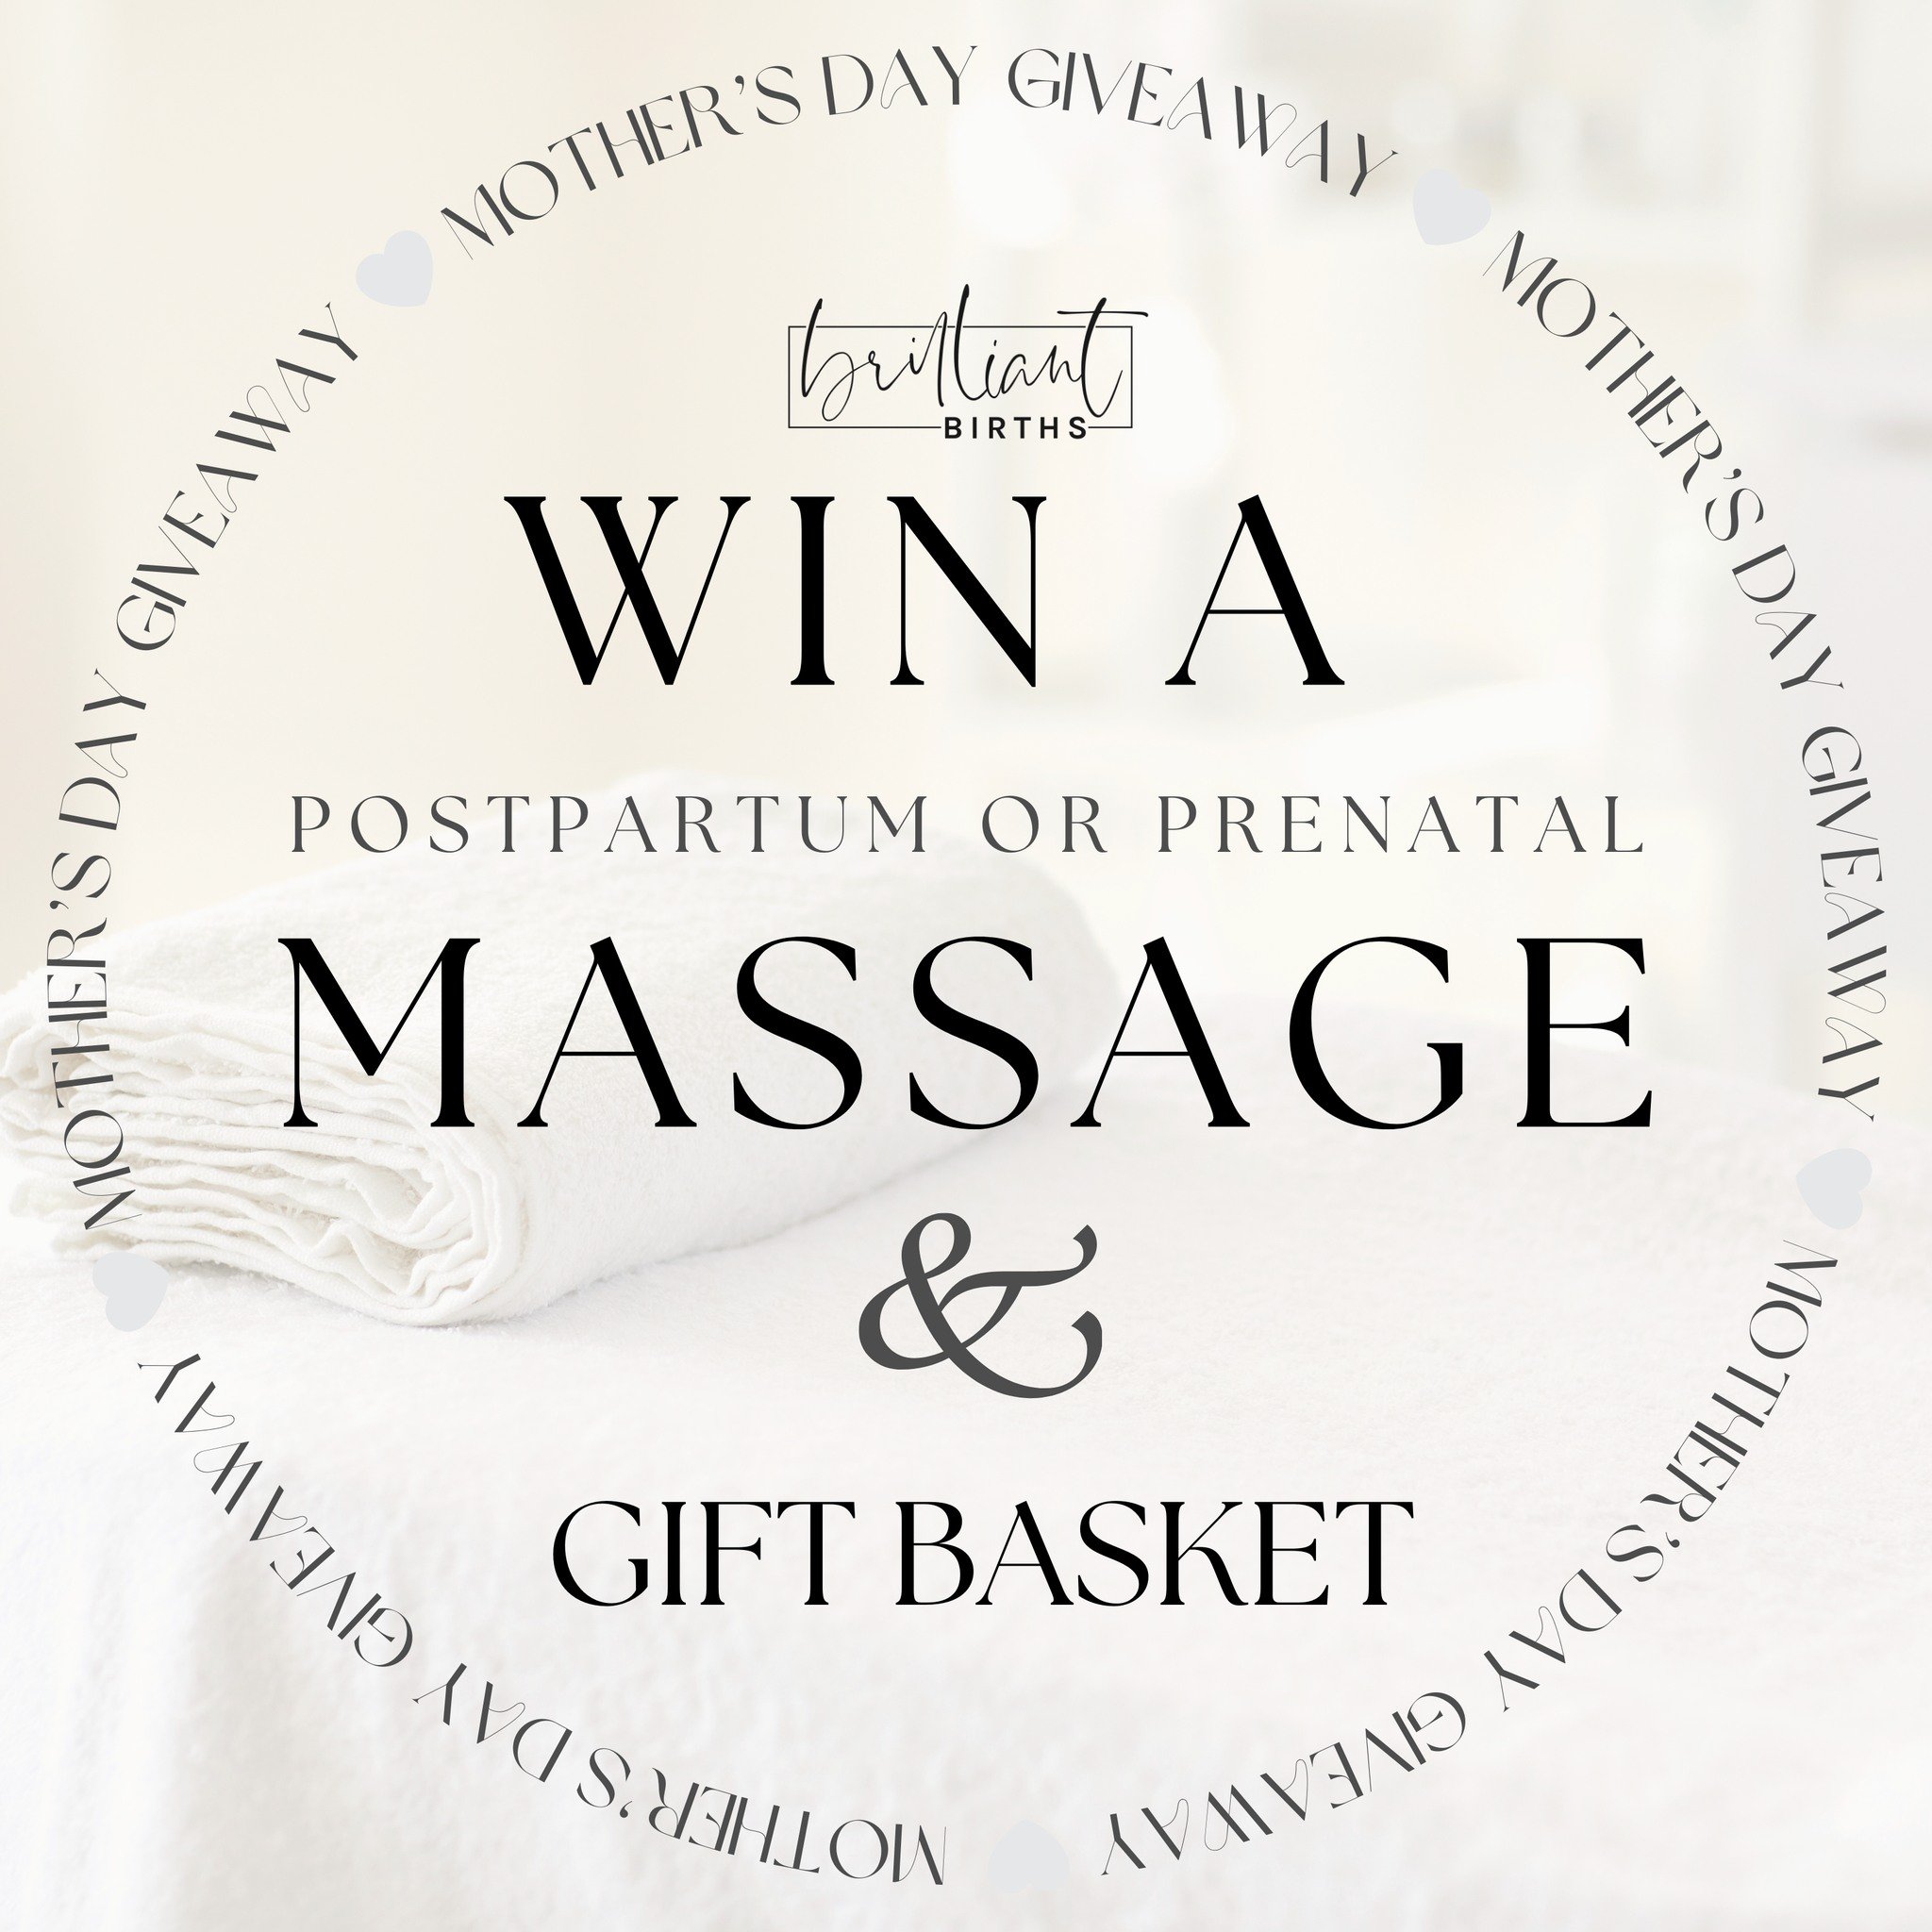 Mother's Day Giveaway! To enter: like this post, tag a fellow parent/soon-to-be-parent, and follow us for entry into our Mother's Day Giveaway. Celebrate yourself, your mom friends, or your partner with a relaxing 60 Minute Prenatal or Postpartum Mas